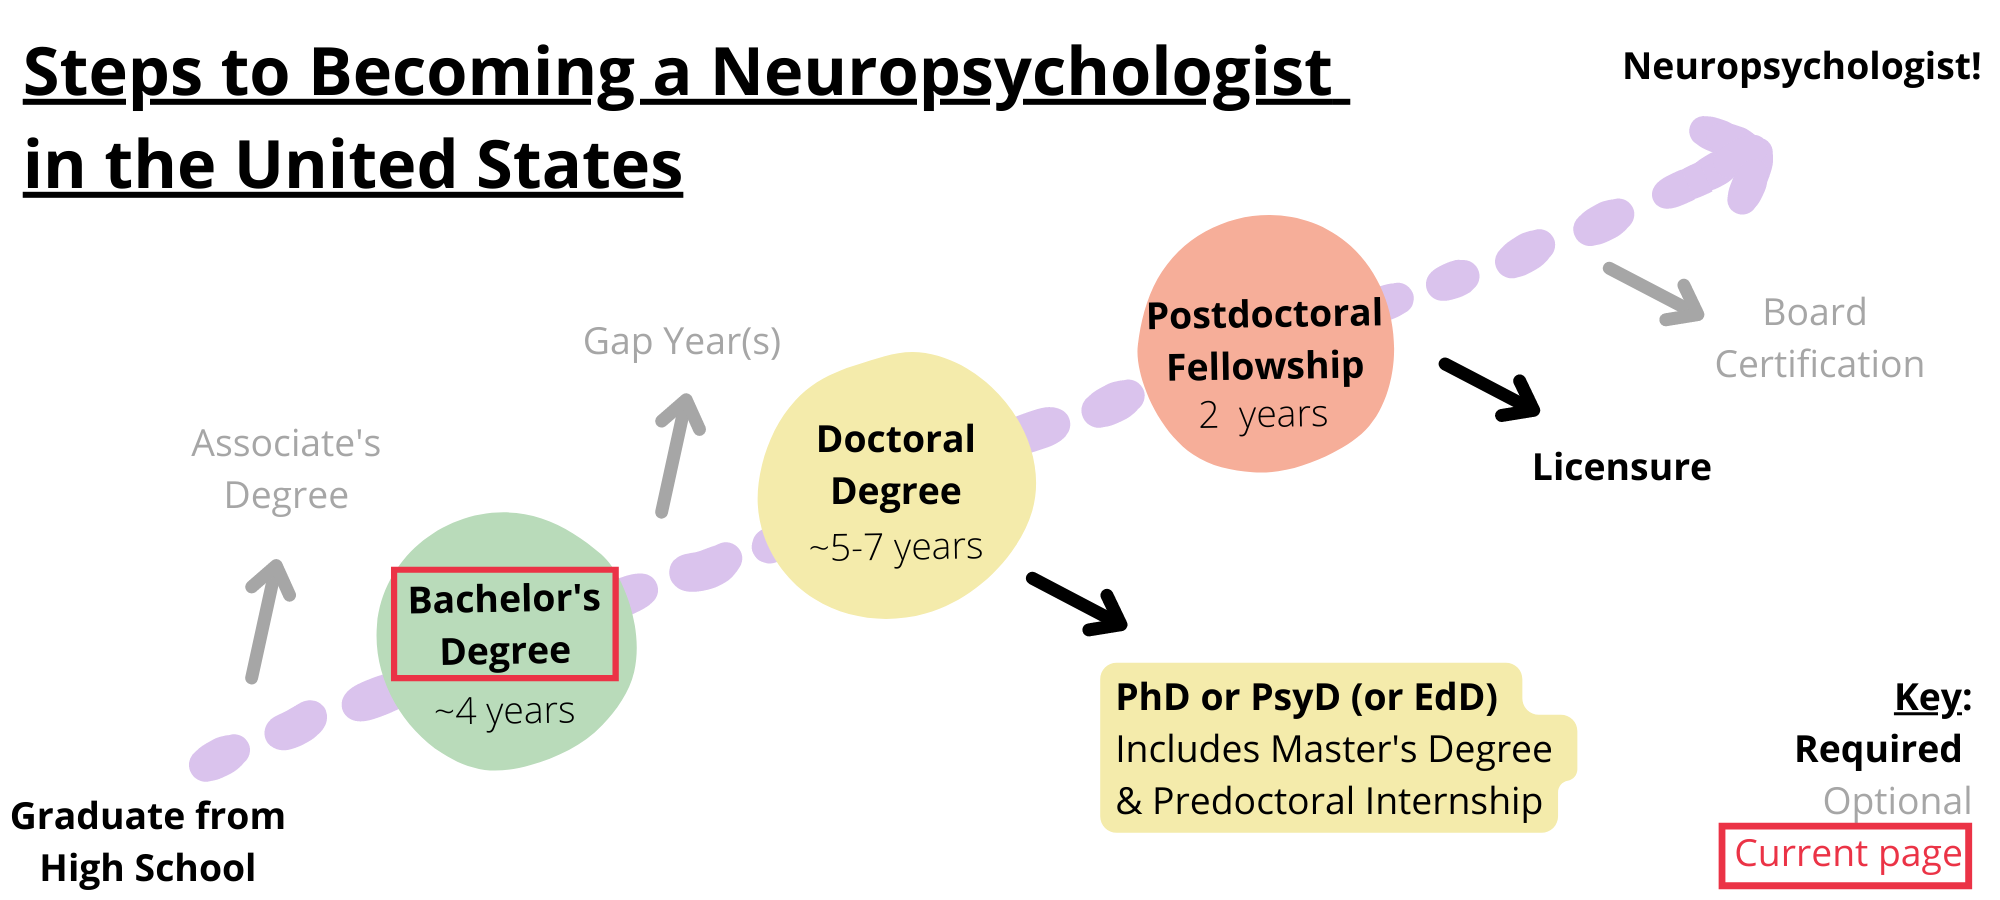 Steps to becoming a neuropsychologist in the United States. Required steps include graduating from high school, obtaining a bachelor’s degree, obtaining a doctoral degree like a PhD, PsyD, or EdD, completing a postdoctoral fellowship, and licensure. Optional steps include obtaining an associate’s degree, taking a gap year, and board certification. You are on the step bachelor's degree.